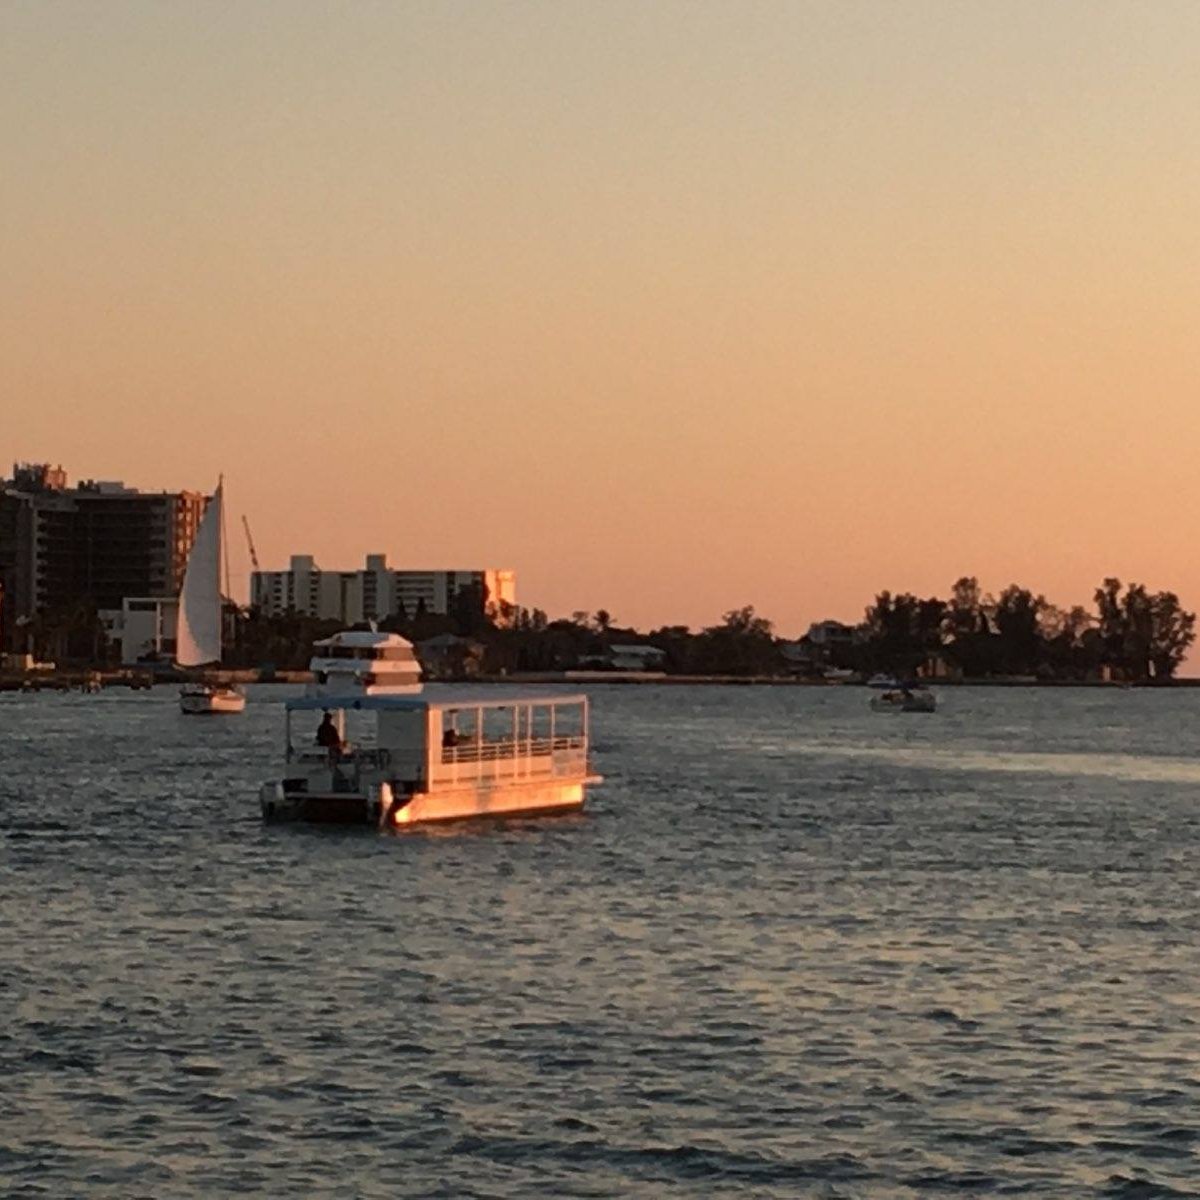 Enjoy a sunset cruise with us -- there's even a chance we'll see some of our resident dolphins and manatees during the trip!